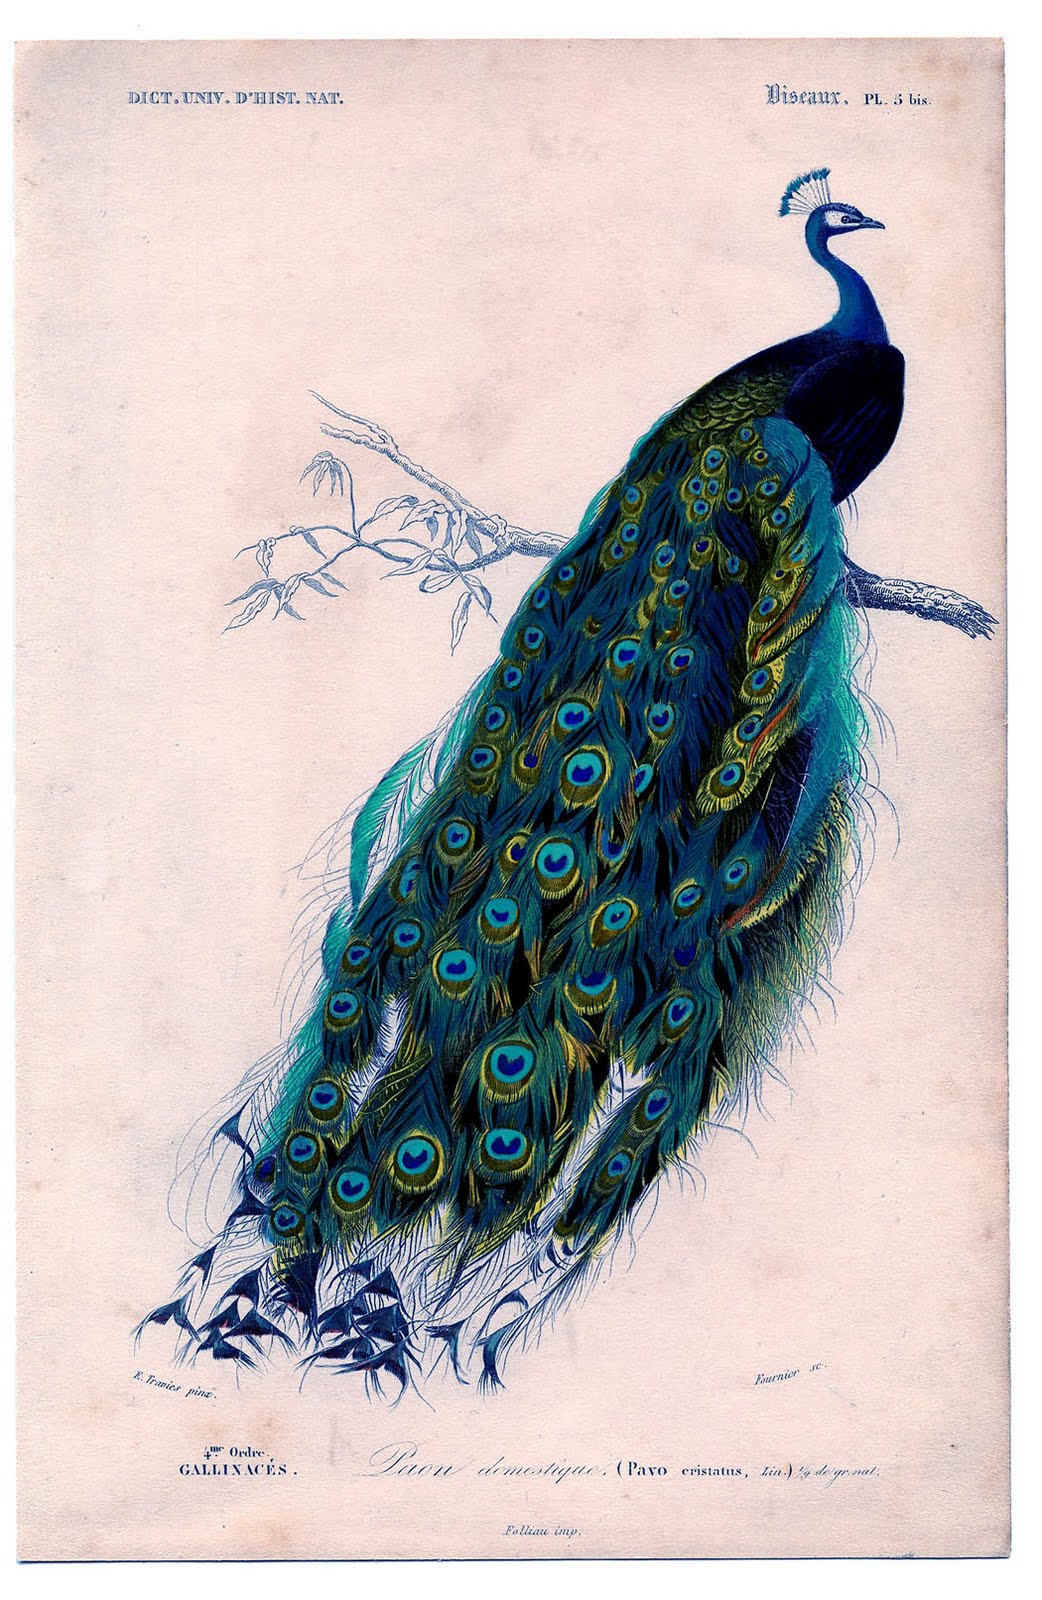 Vintage Clip Art - Natural History - Stunning Peacock - The Graphics Fairy